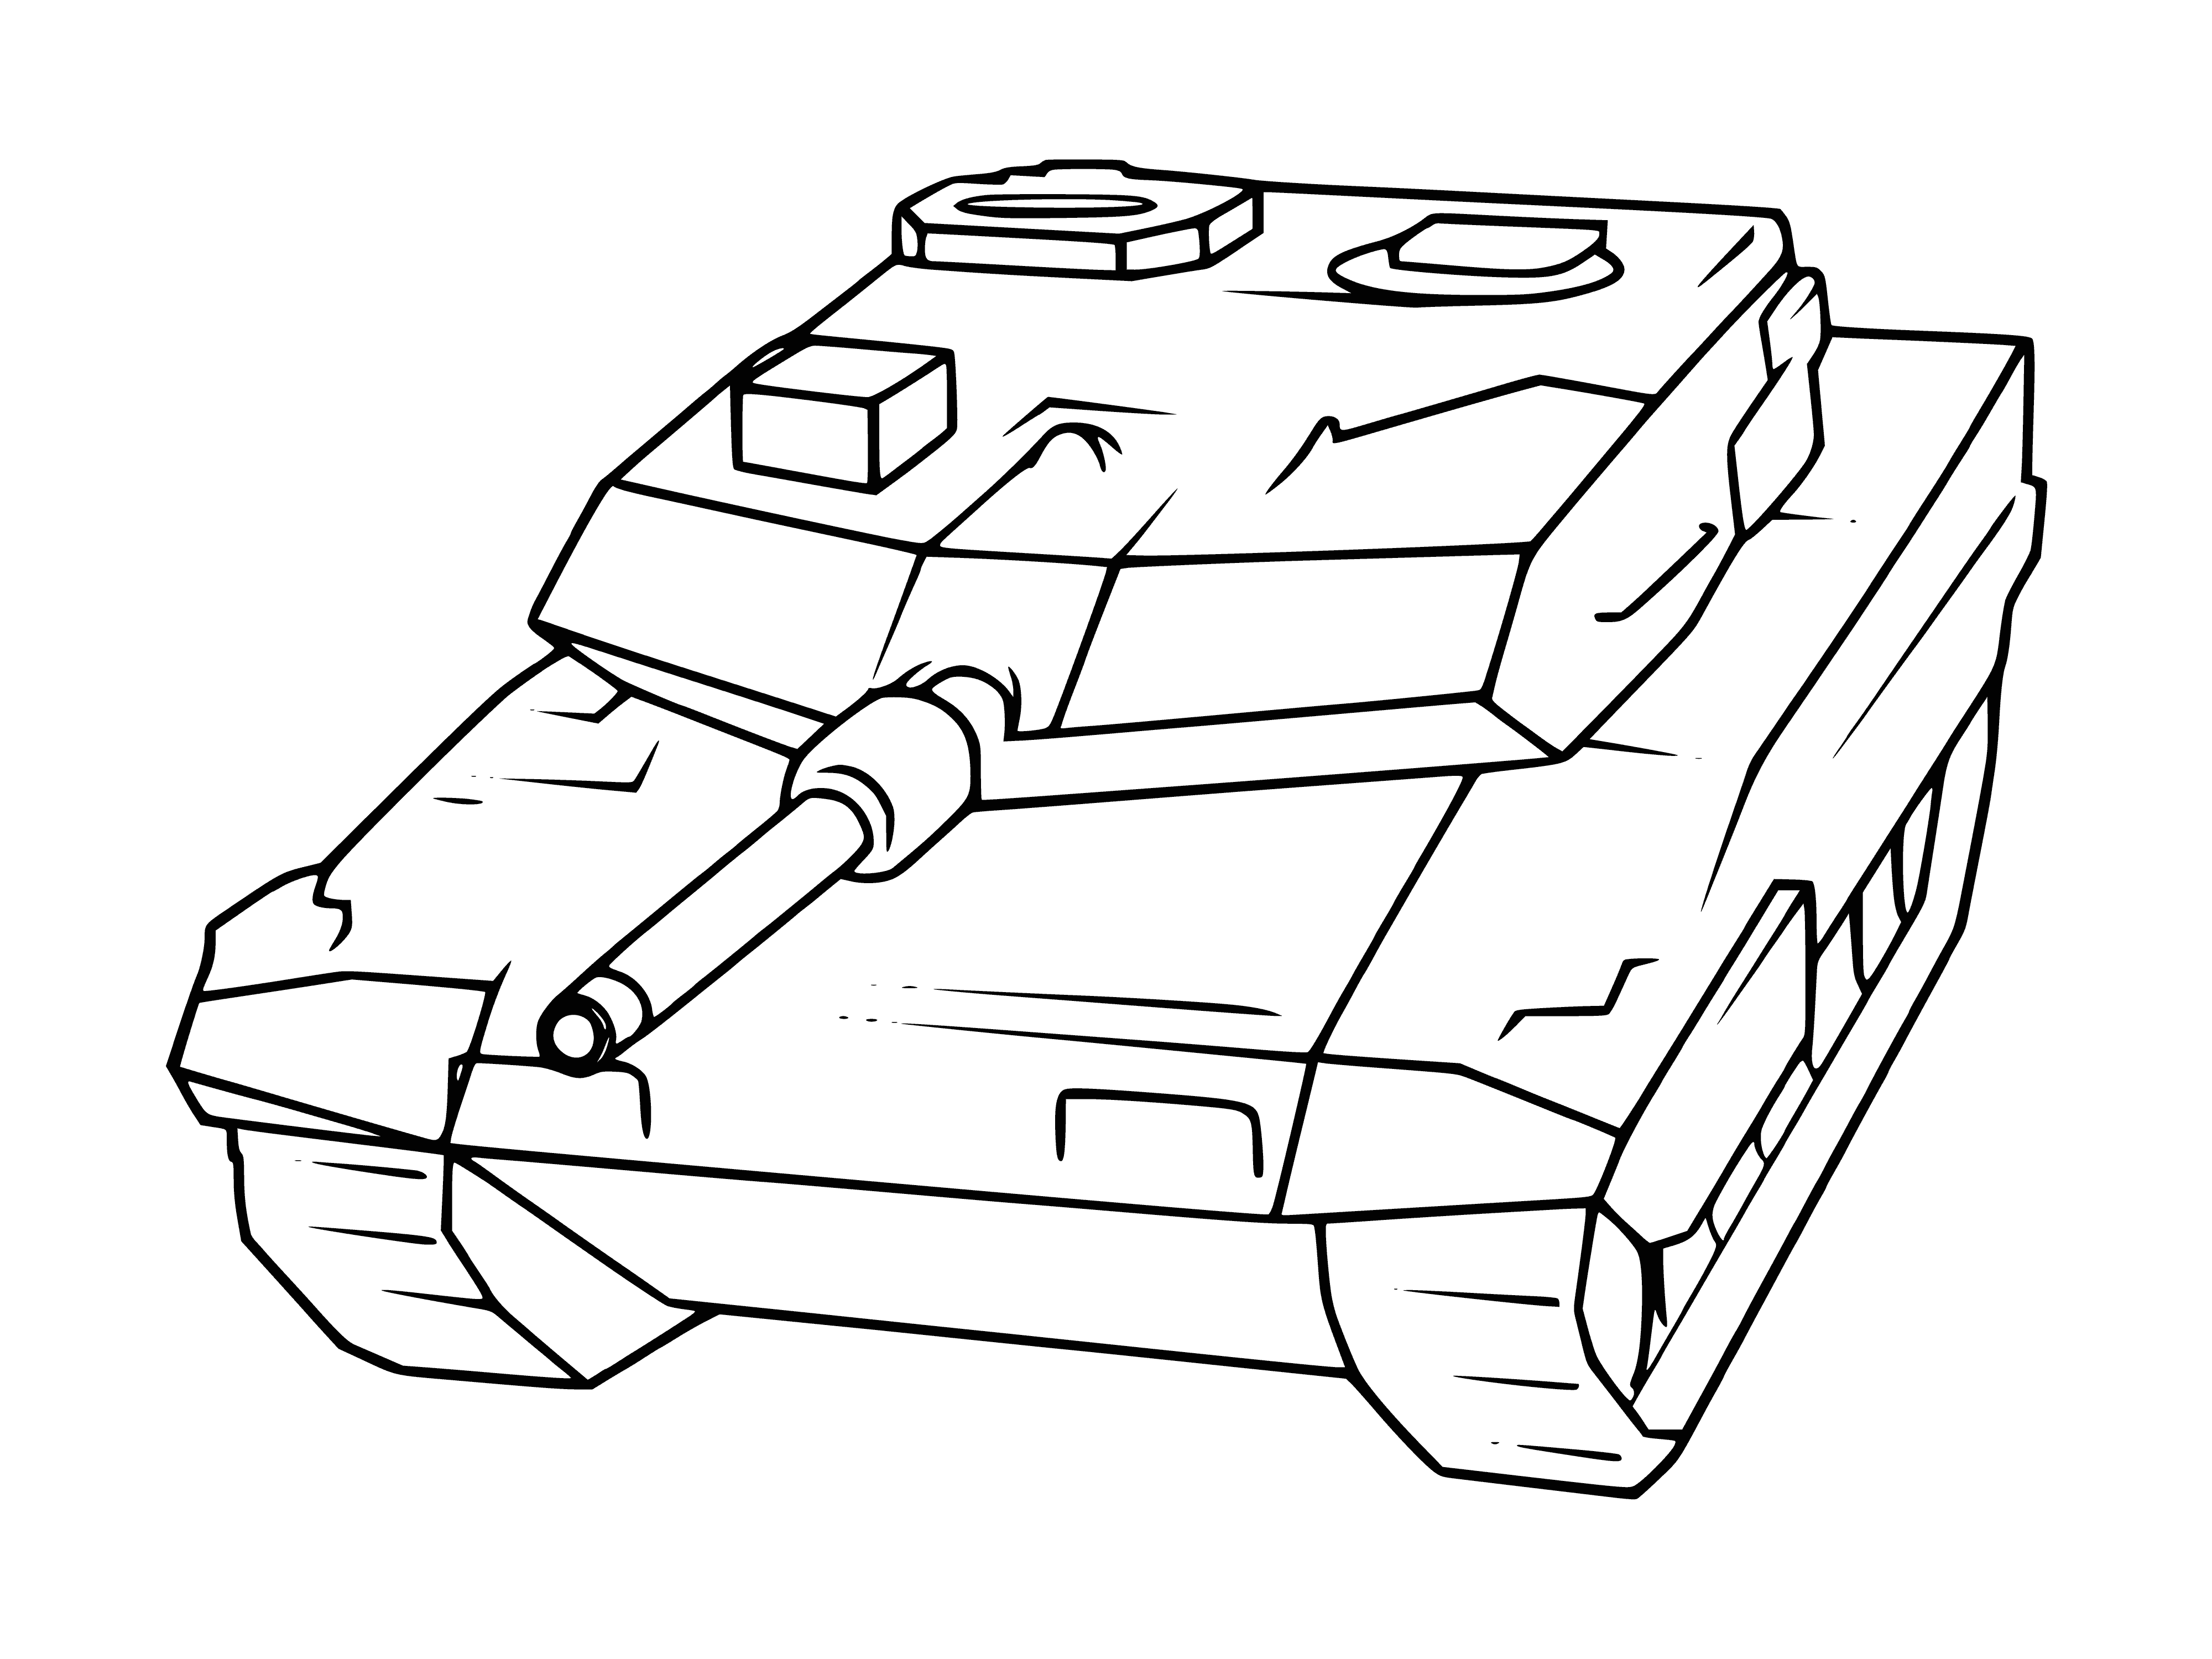 coloring page: Tanks are large, armoured fighting vehicles for front-line combat; heavily armed & armored for mobile, offensive capability.